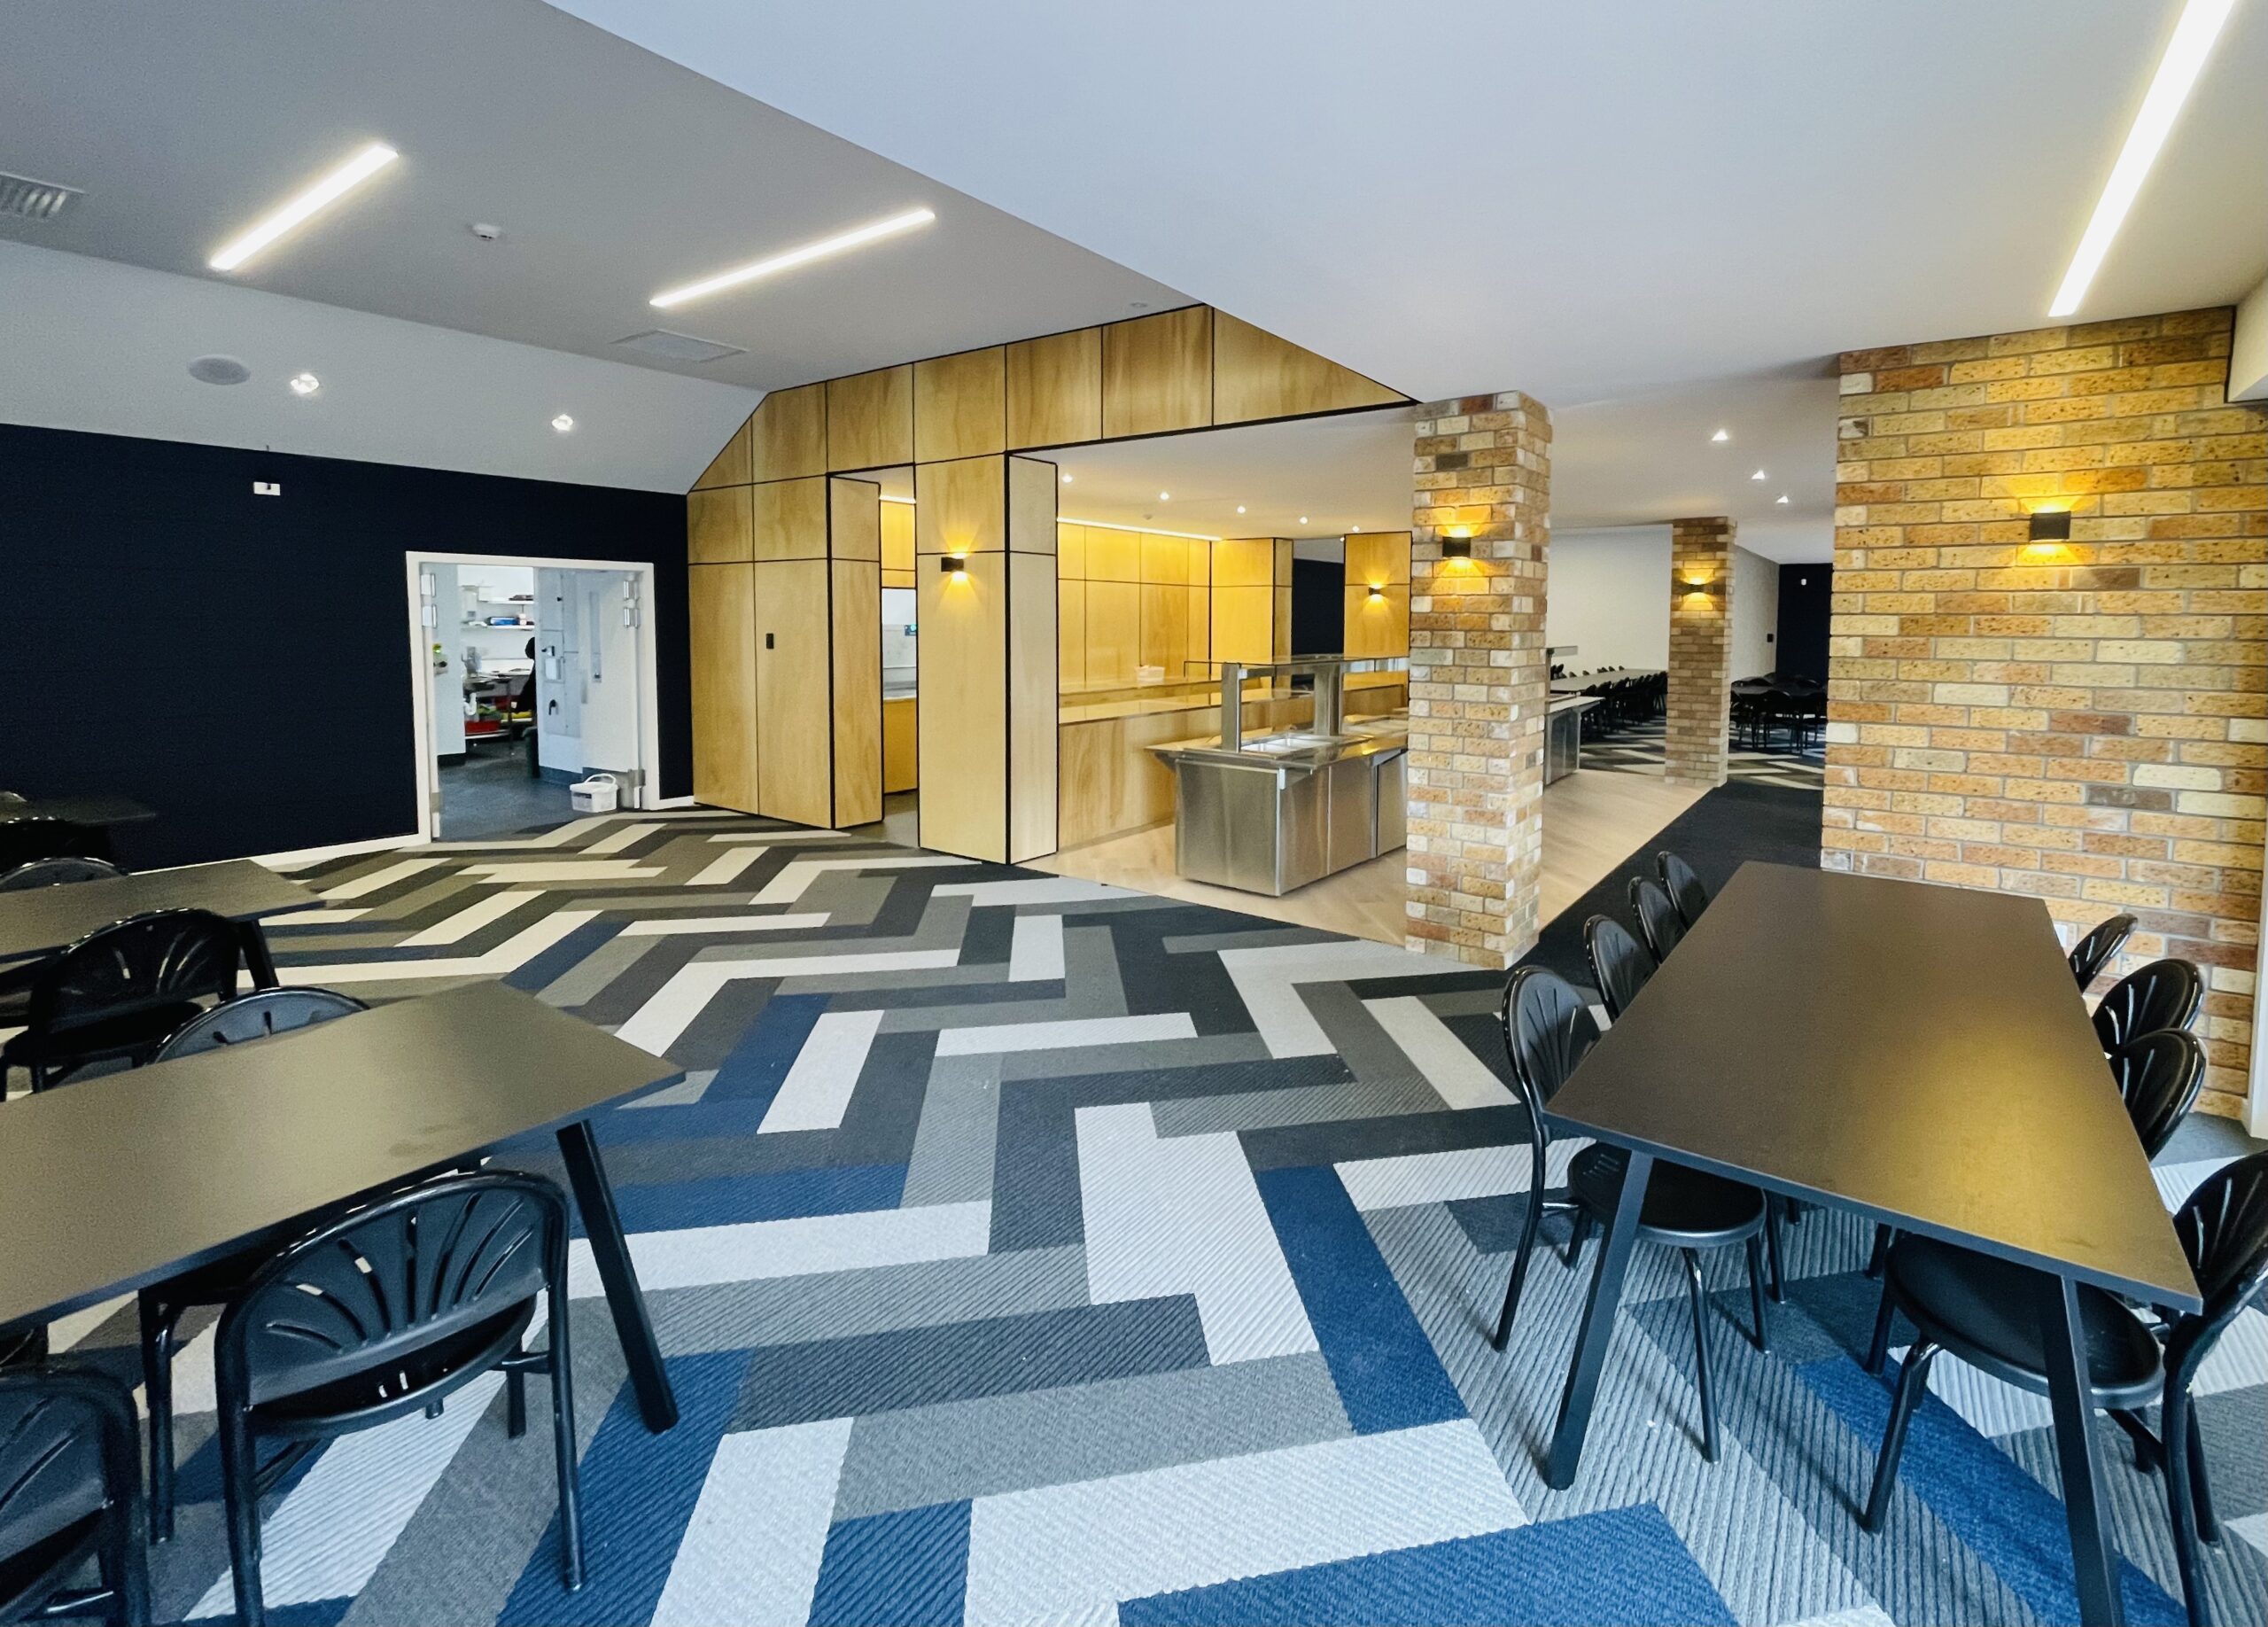 Waikato Diocesan School New Dinning Hall | Orb Property Consultants